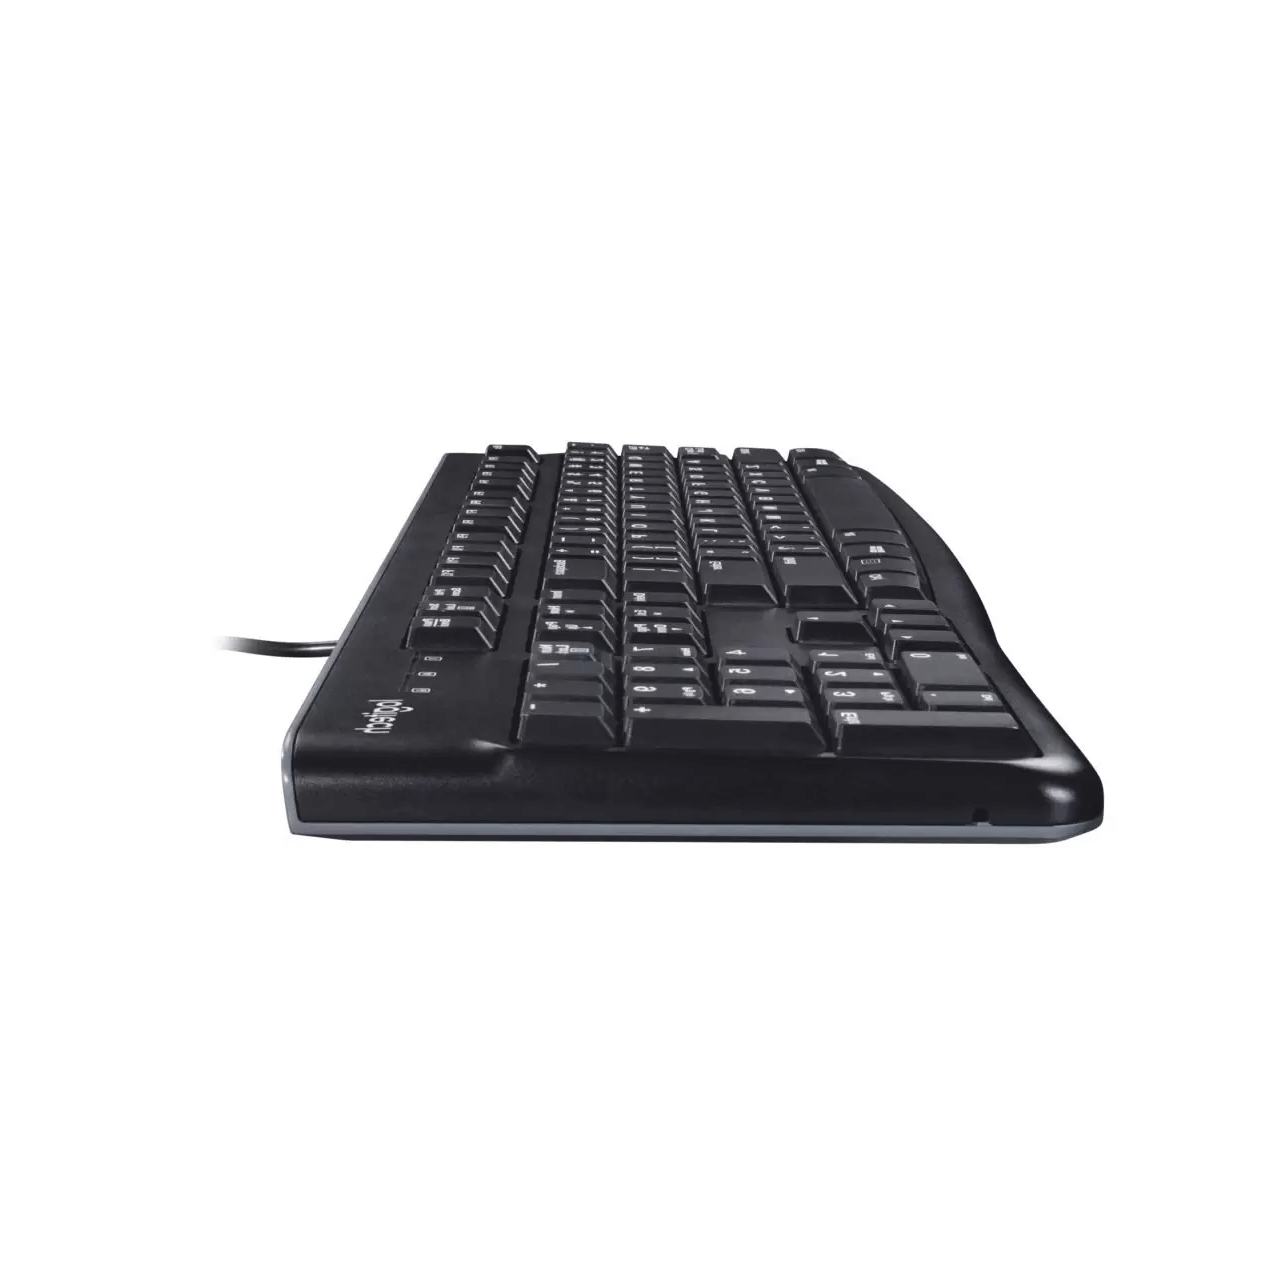 Logitech-K120-Wired-----Keyboard-With-Persian-Letters